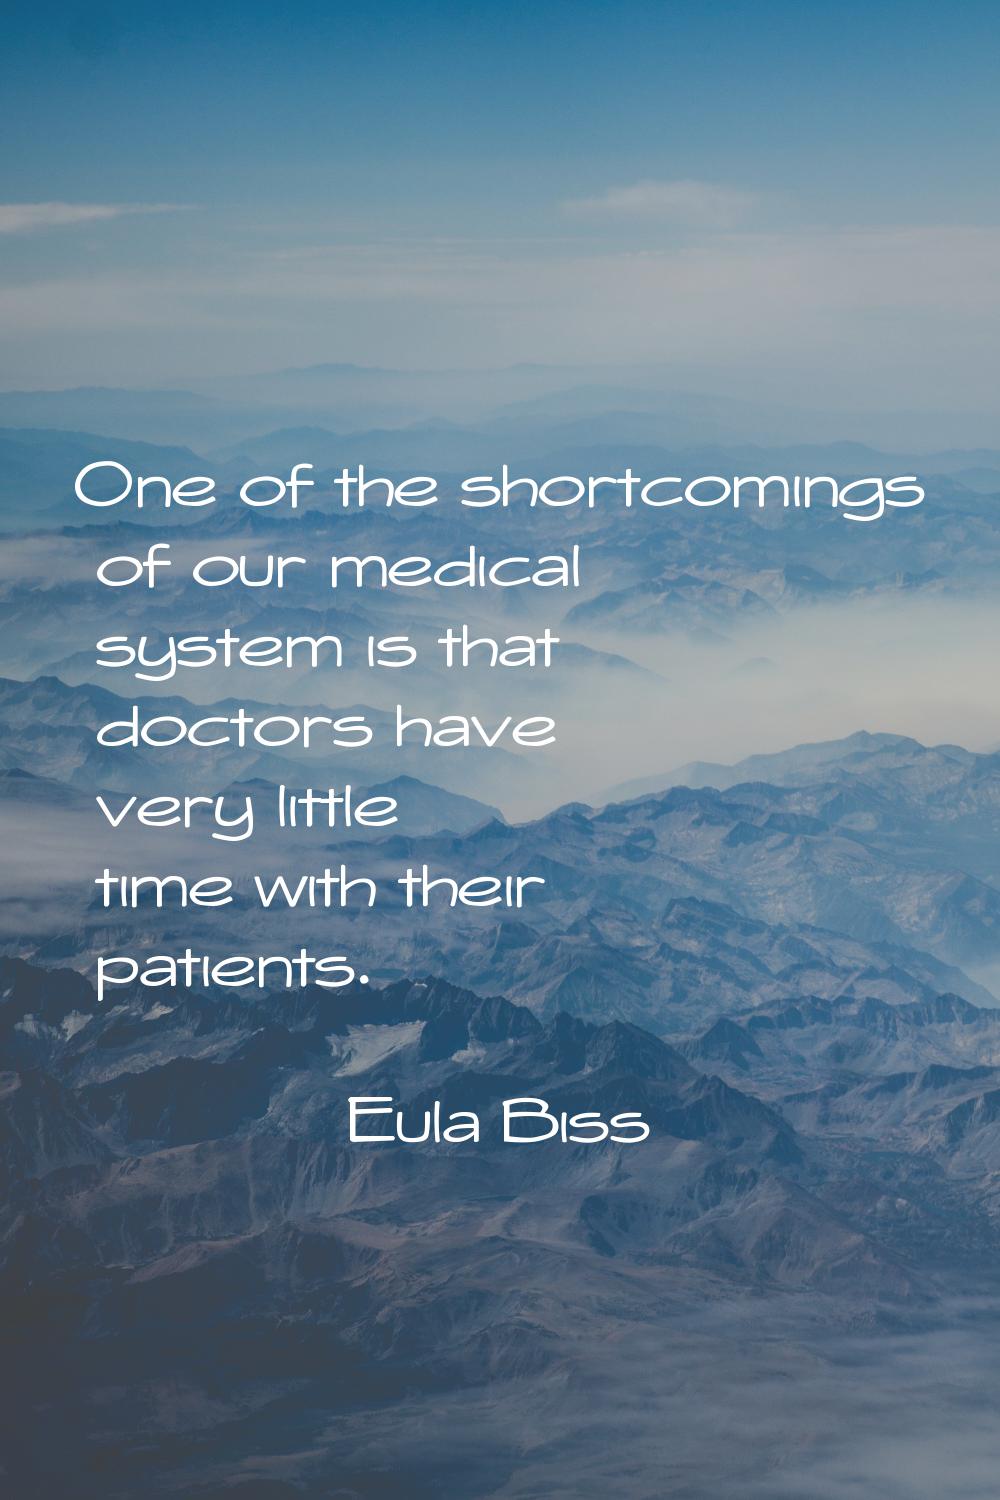 One of the shortcomings of our medical system is that doctors have very little time with their pati